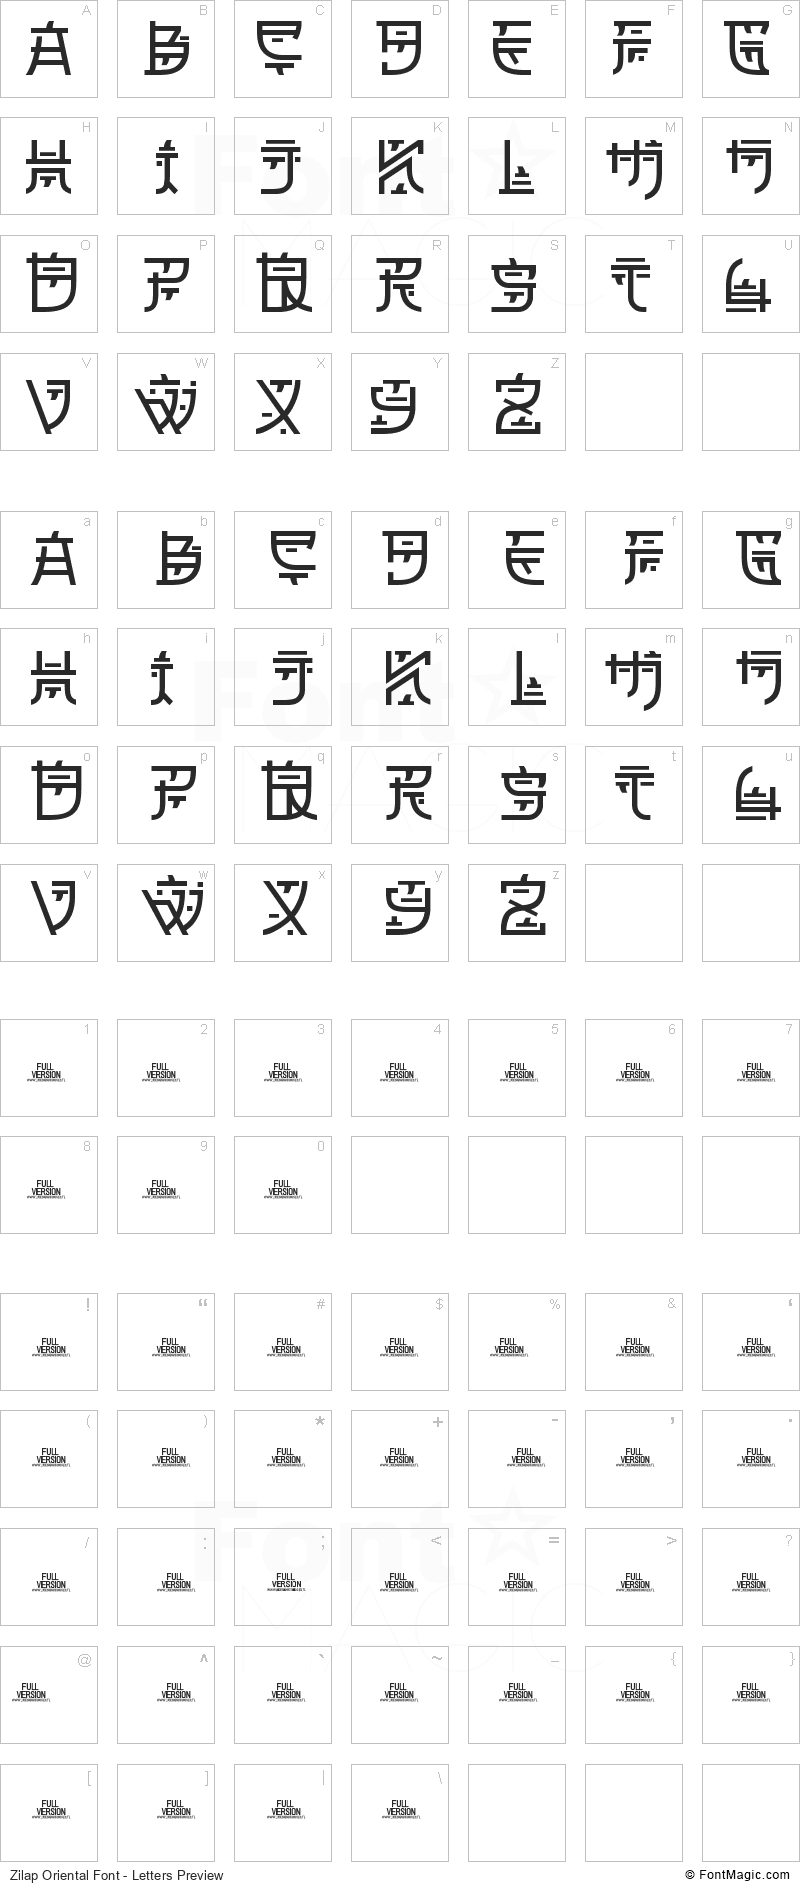 Zilap Oriental Font - All Latters Preview Chart